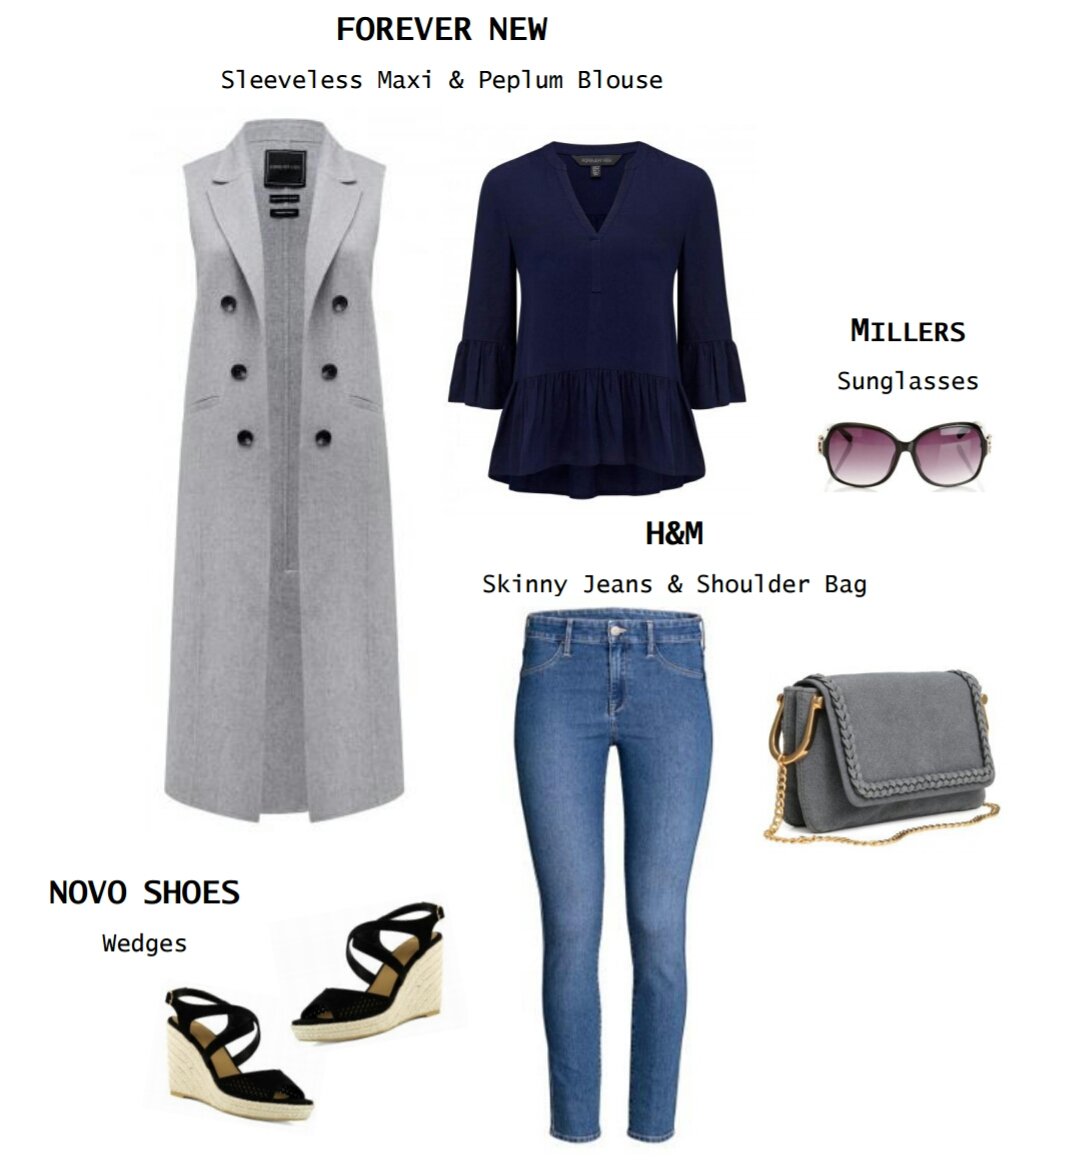 WEEKEND SHOPPING - Style & Life by Susana